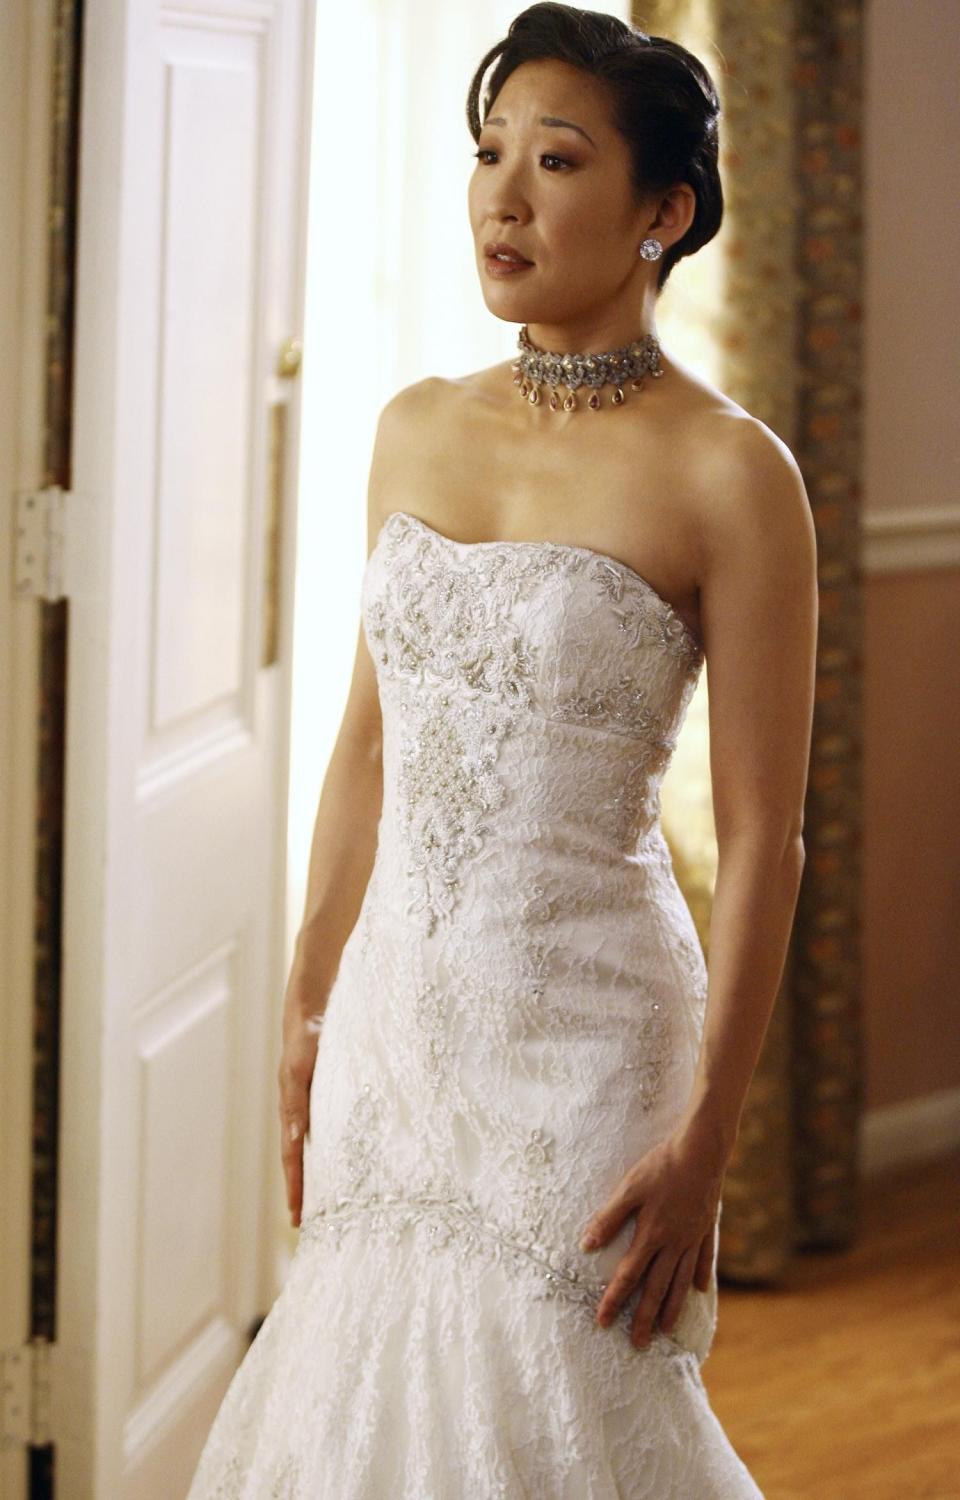 Christina Yang stands in a wedding dress on "Greys Anatomy."